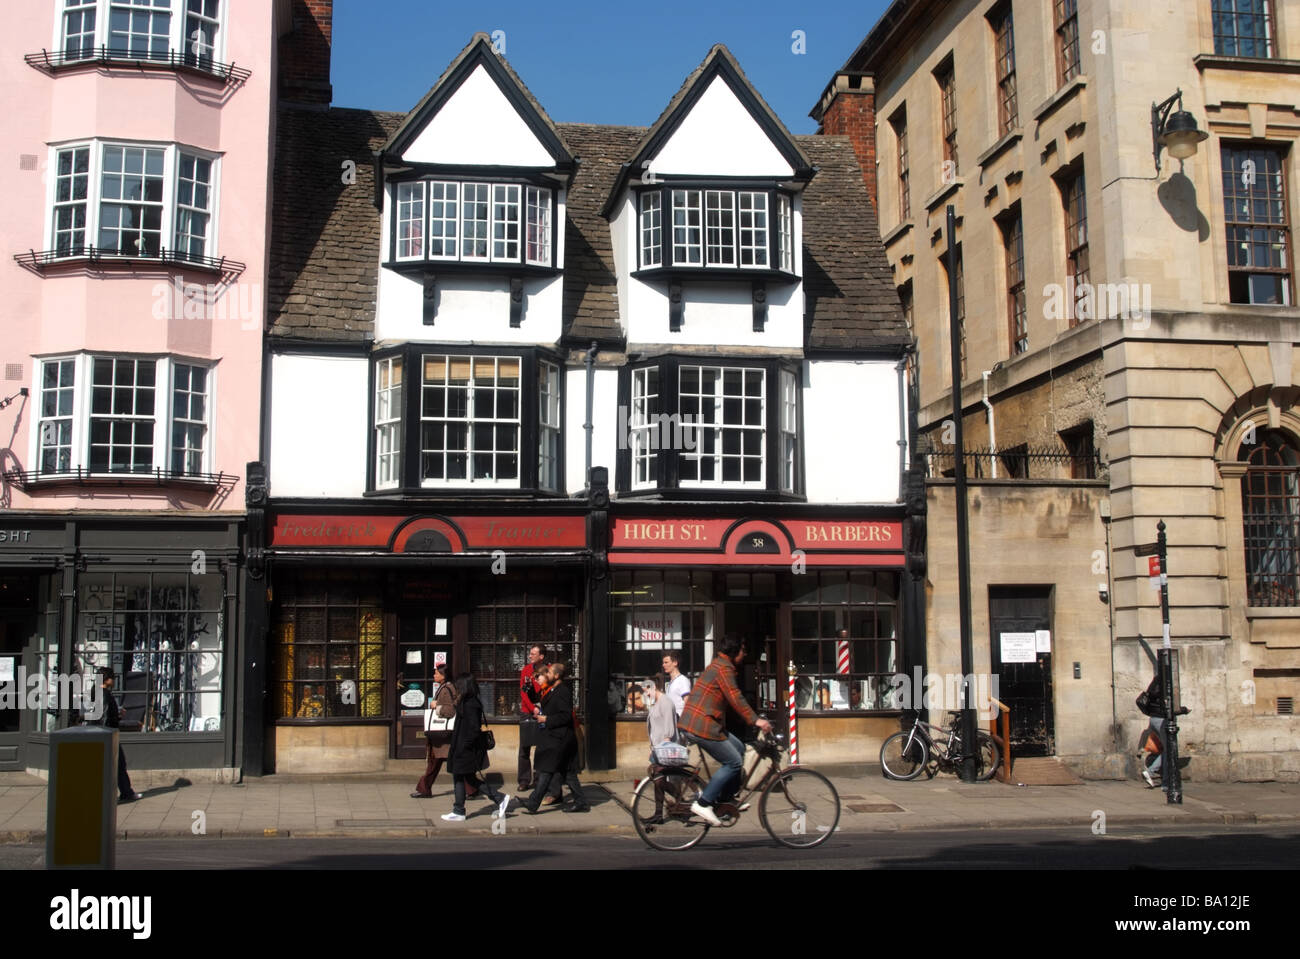 Old shops in Oxford High Street, ngland Stock Photo